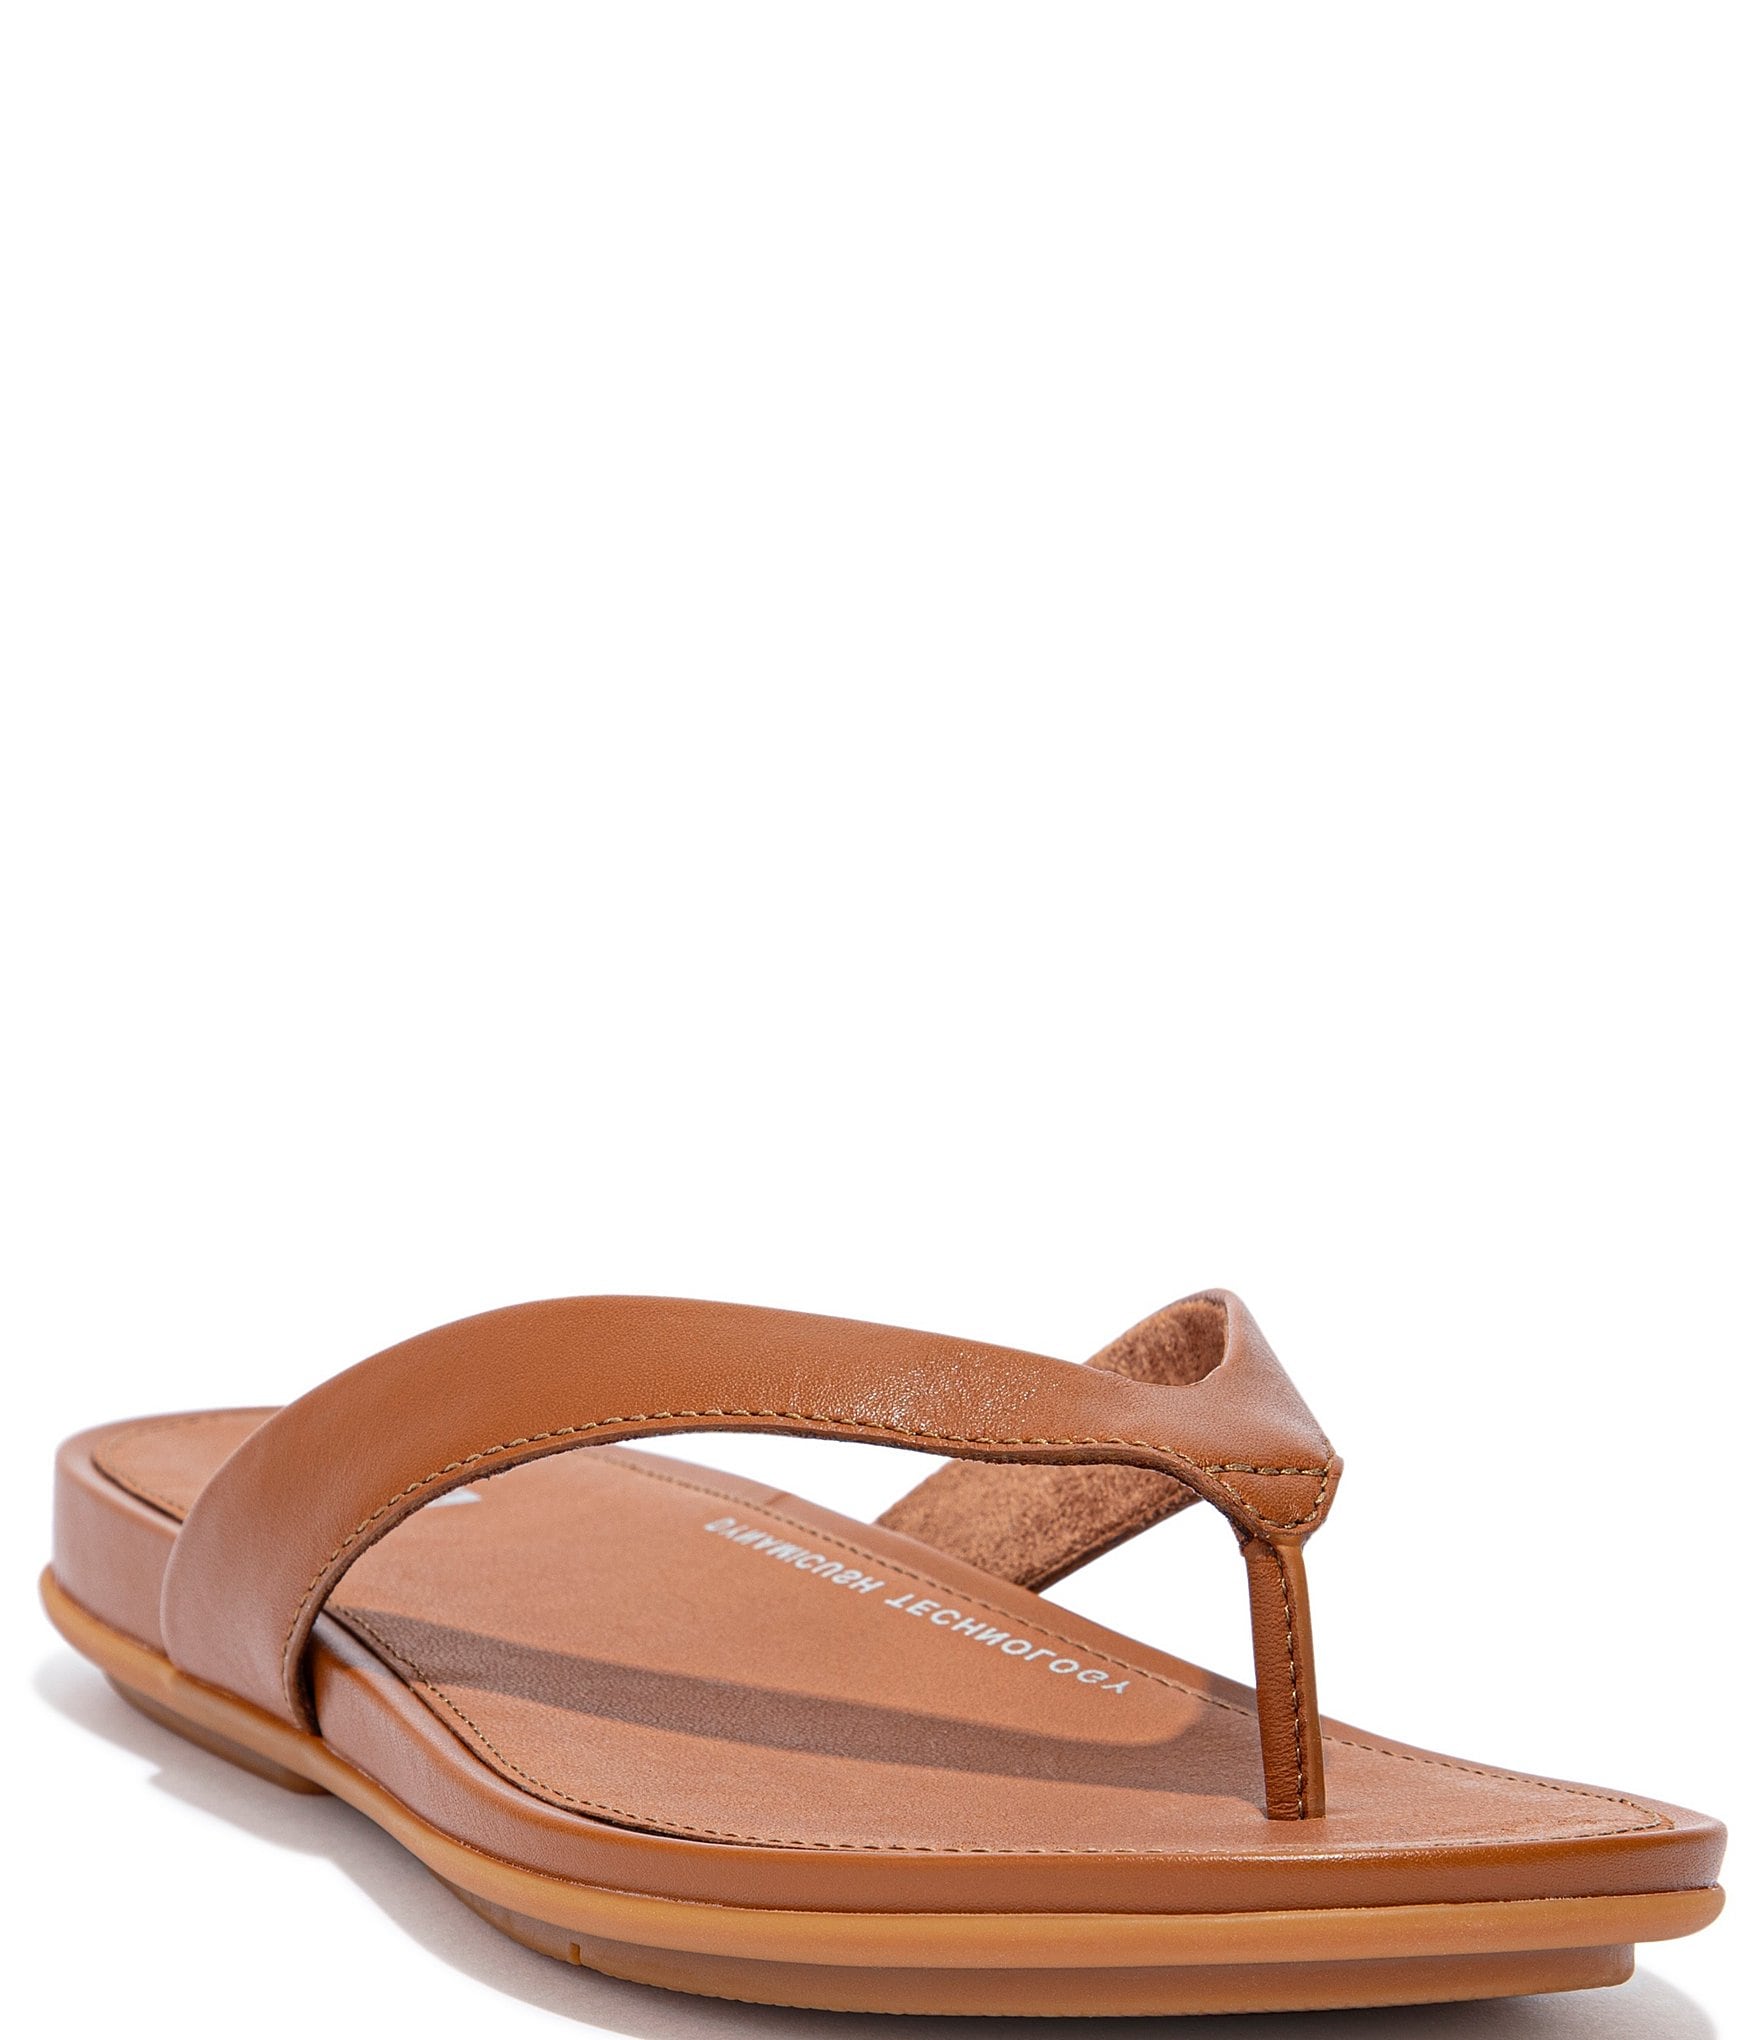 https://dimg.dillards.com/is/image/DillardsZoom/zoom/fitflop-gracie-leather-flip-flops/00000000_zi_96bfd5ff-d881-4610-bf4e-6dc1a2ced250.jpg